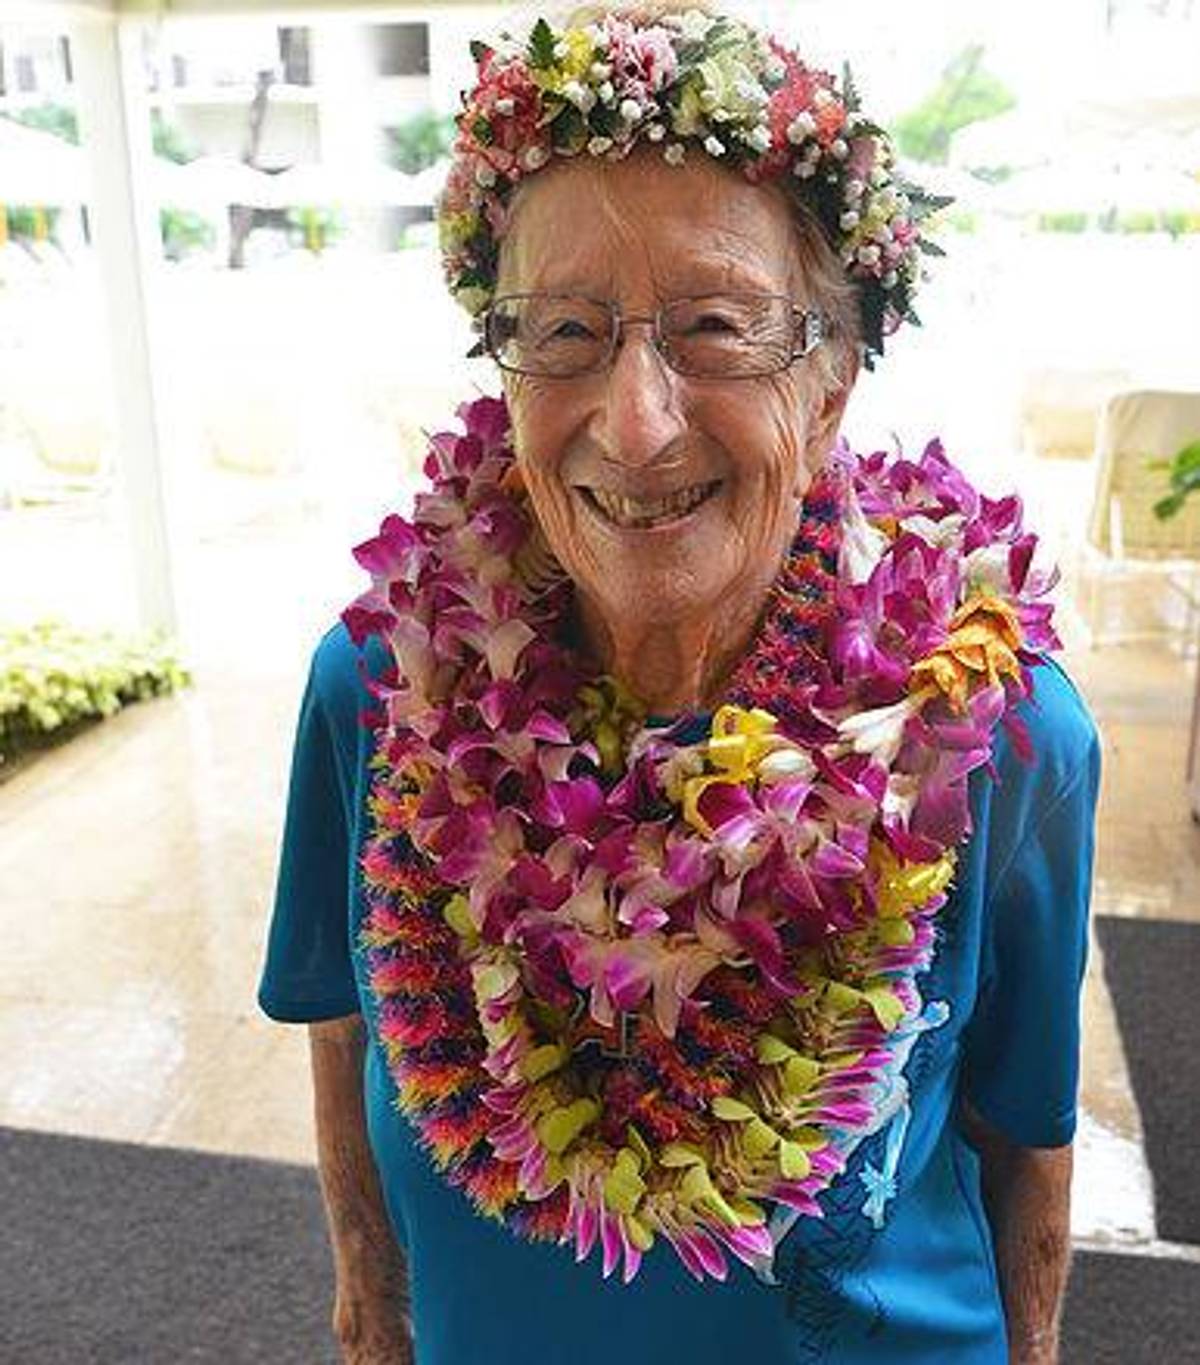 Said Glady Burrill, 97, from Honolulu, HI: ““This election is about hope, optimism, respect and qualifications. Hillary has them all. From one strong woman to another.”